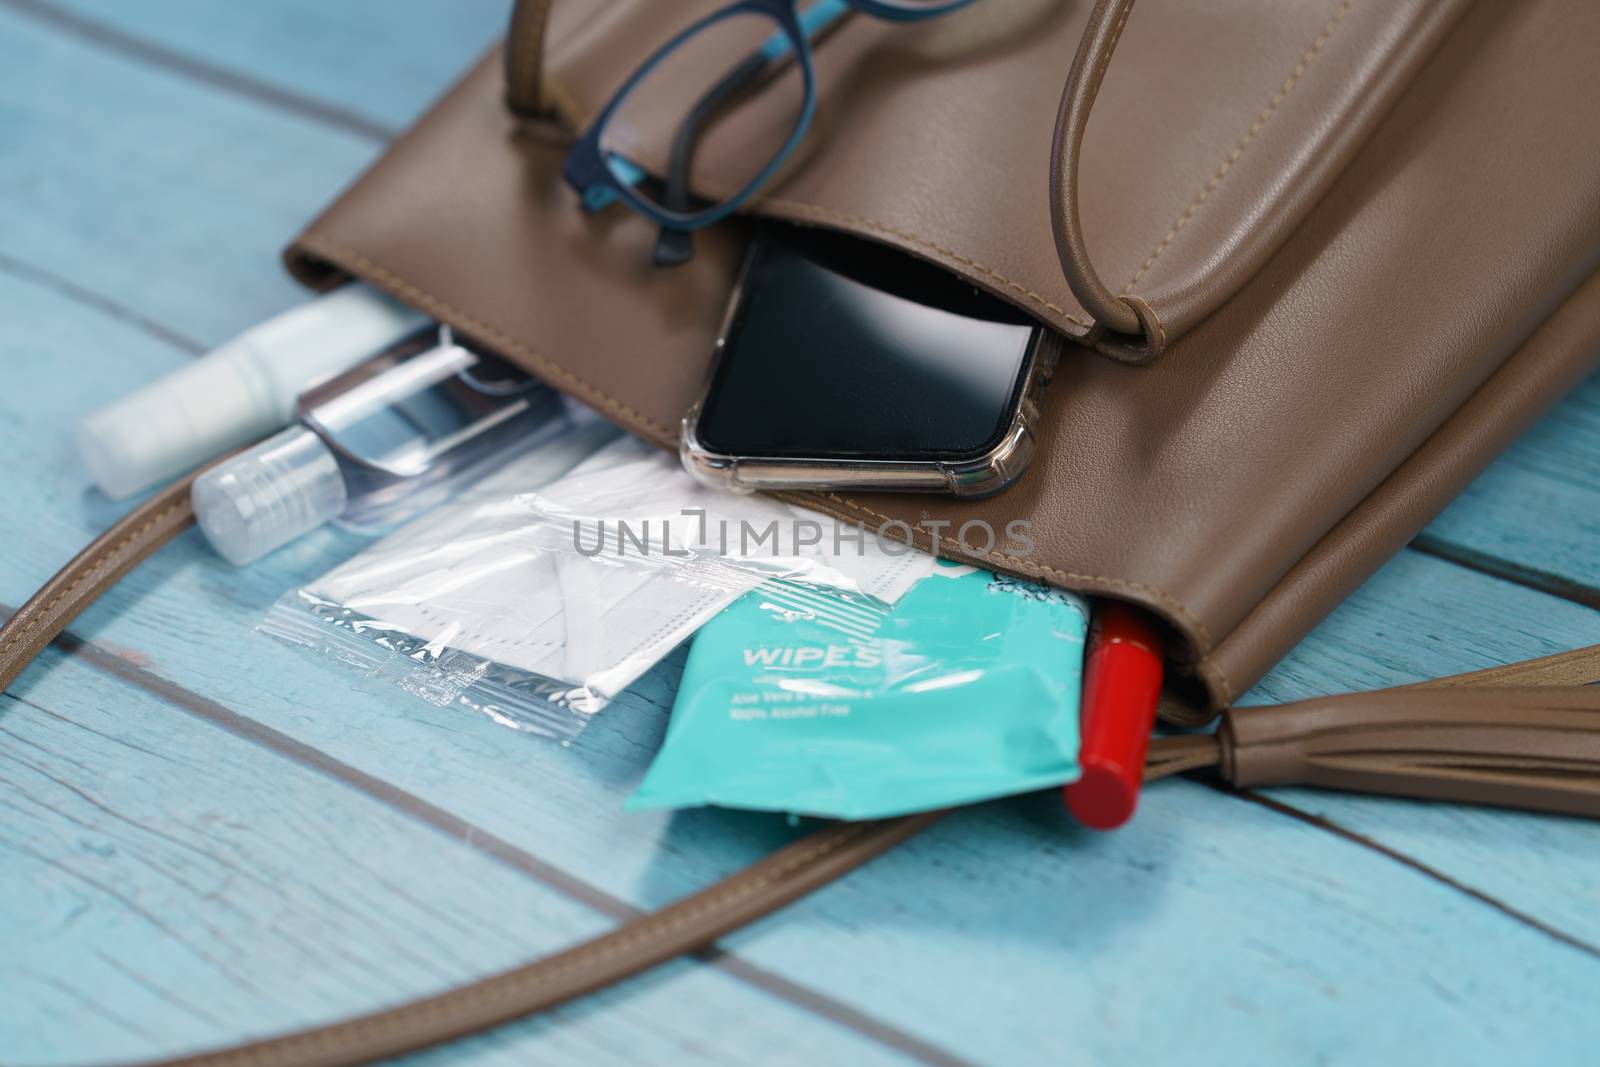 Hand bag with 2020 must have items smart phone, protective face mask, glasses and sanitizer gel corona virus or Covid-19 protection.